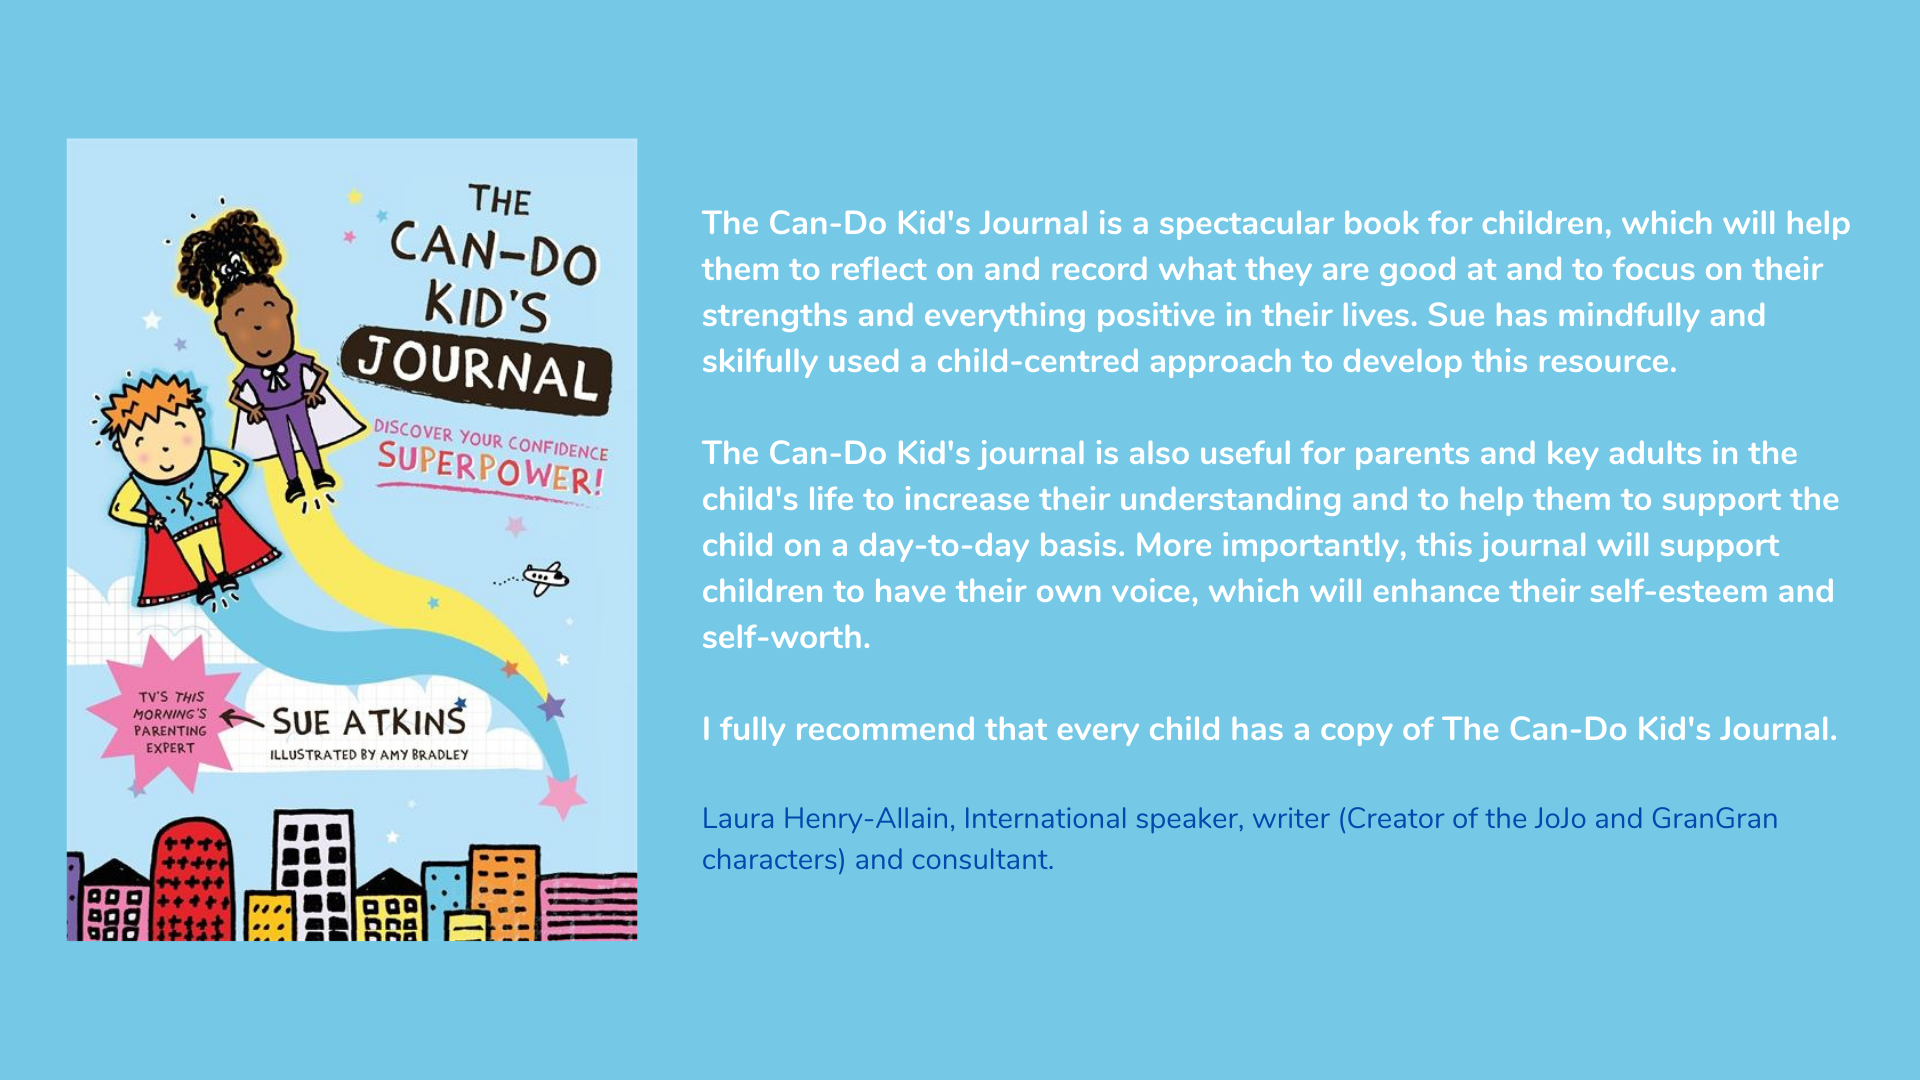 The Can-Do Kid's Journal: Discover Your Confidence Superpower!